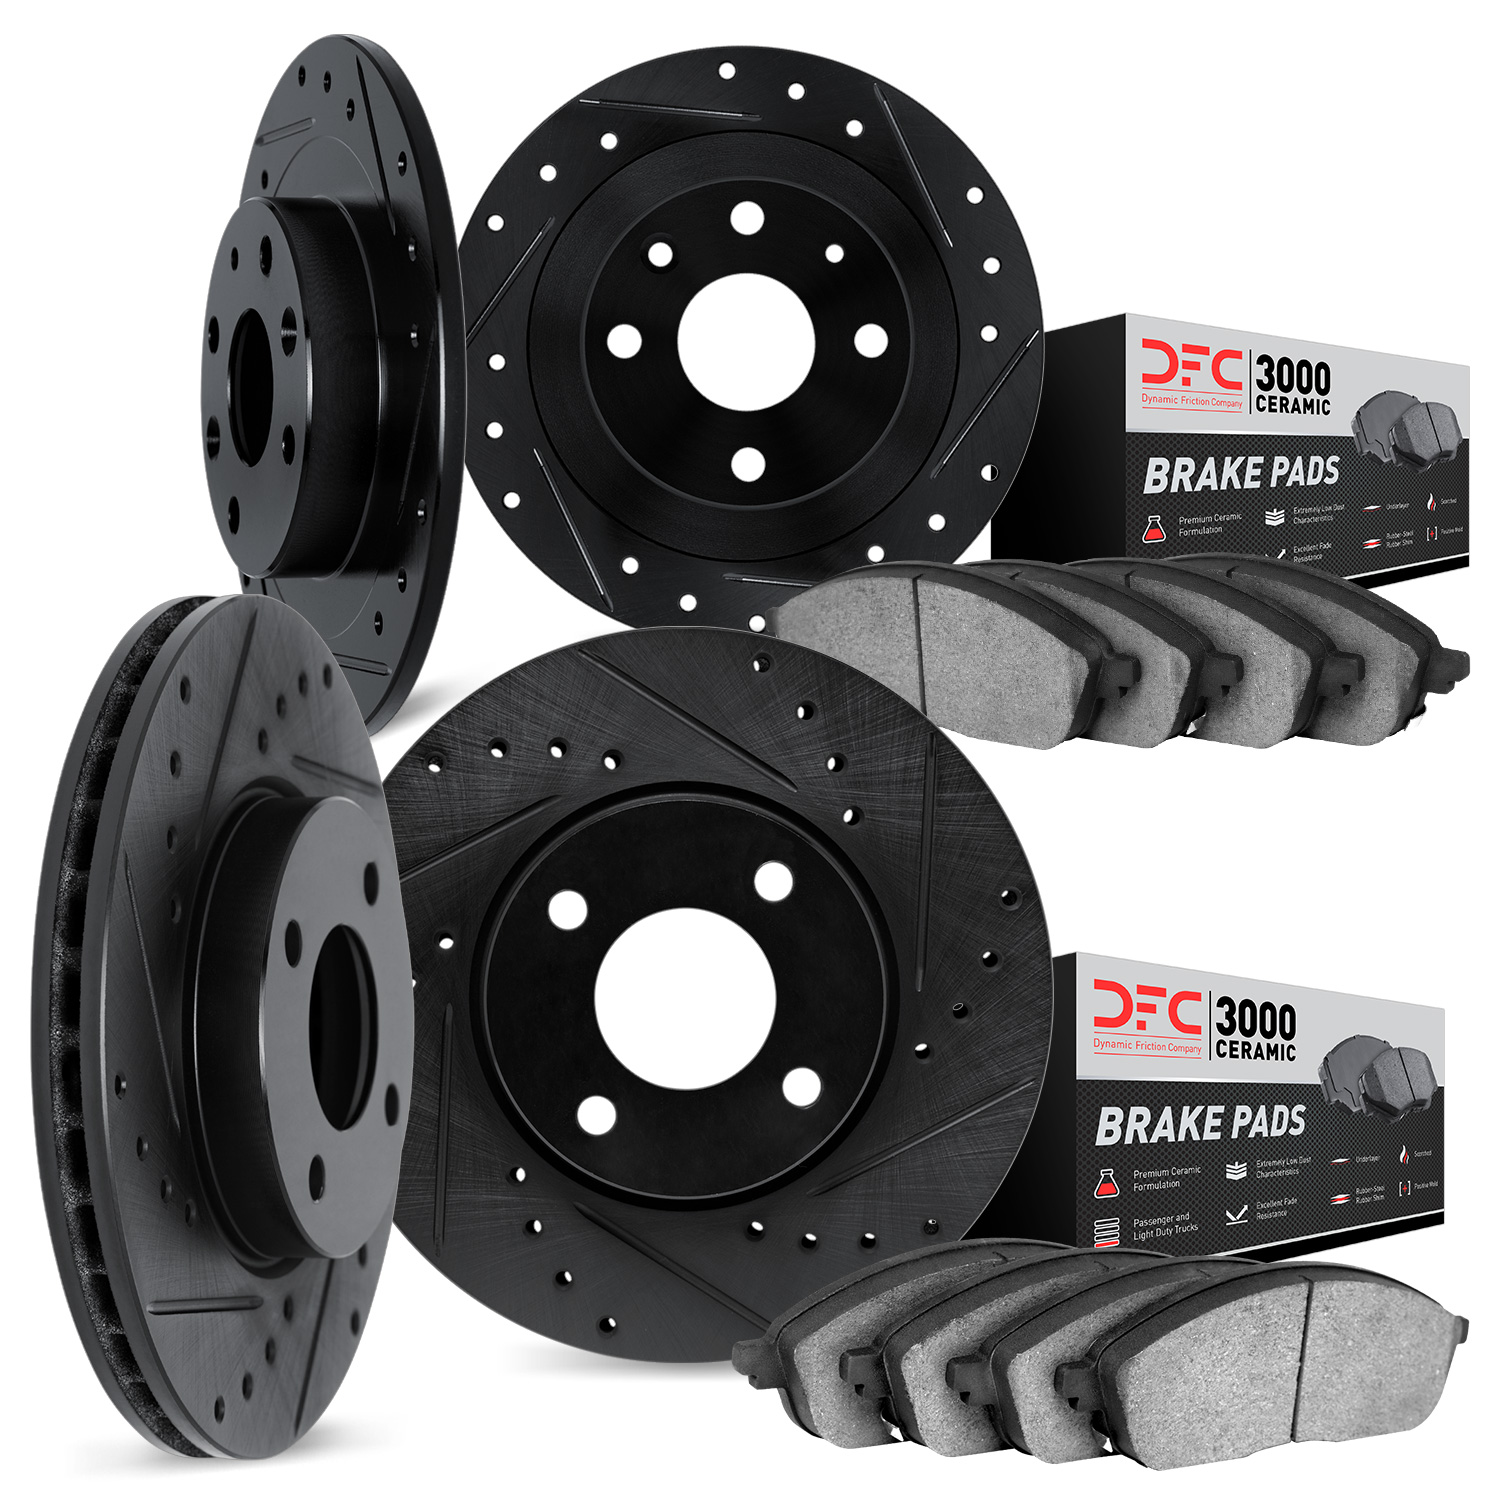 8304-07003 Drilled/Slotted Brake Rotors with 3000-Series Ceramic Brake Pads Kit [Black], 2013-2019 Mopar, Position: Front and Re